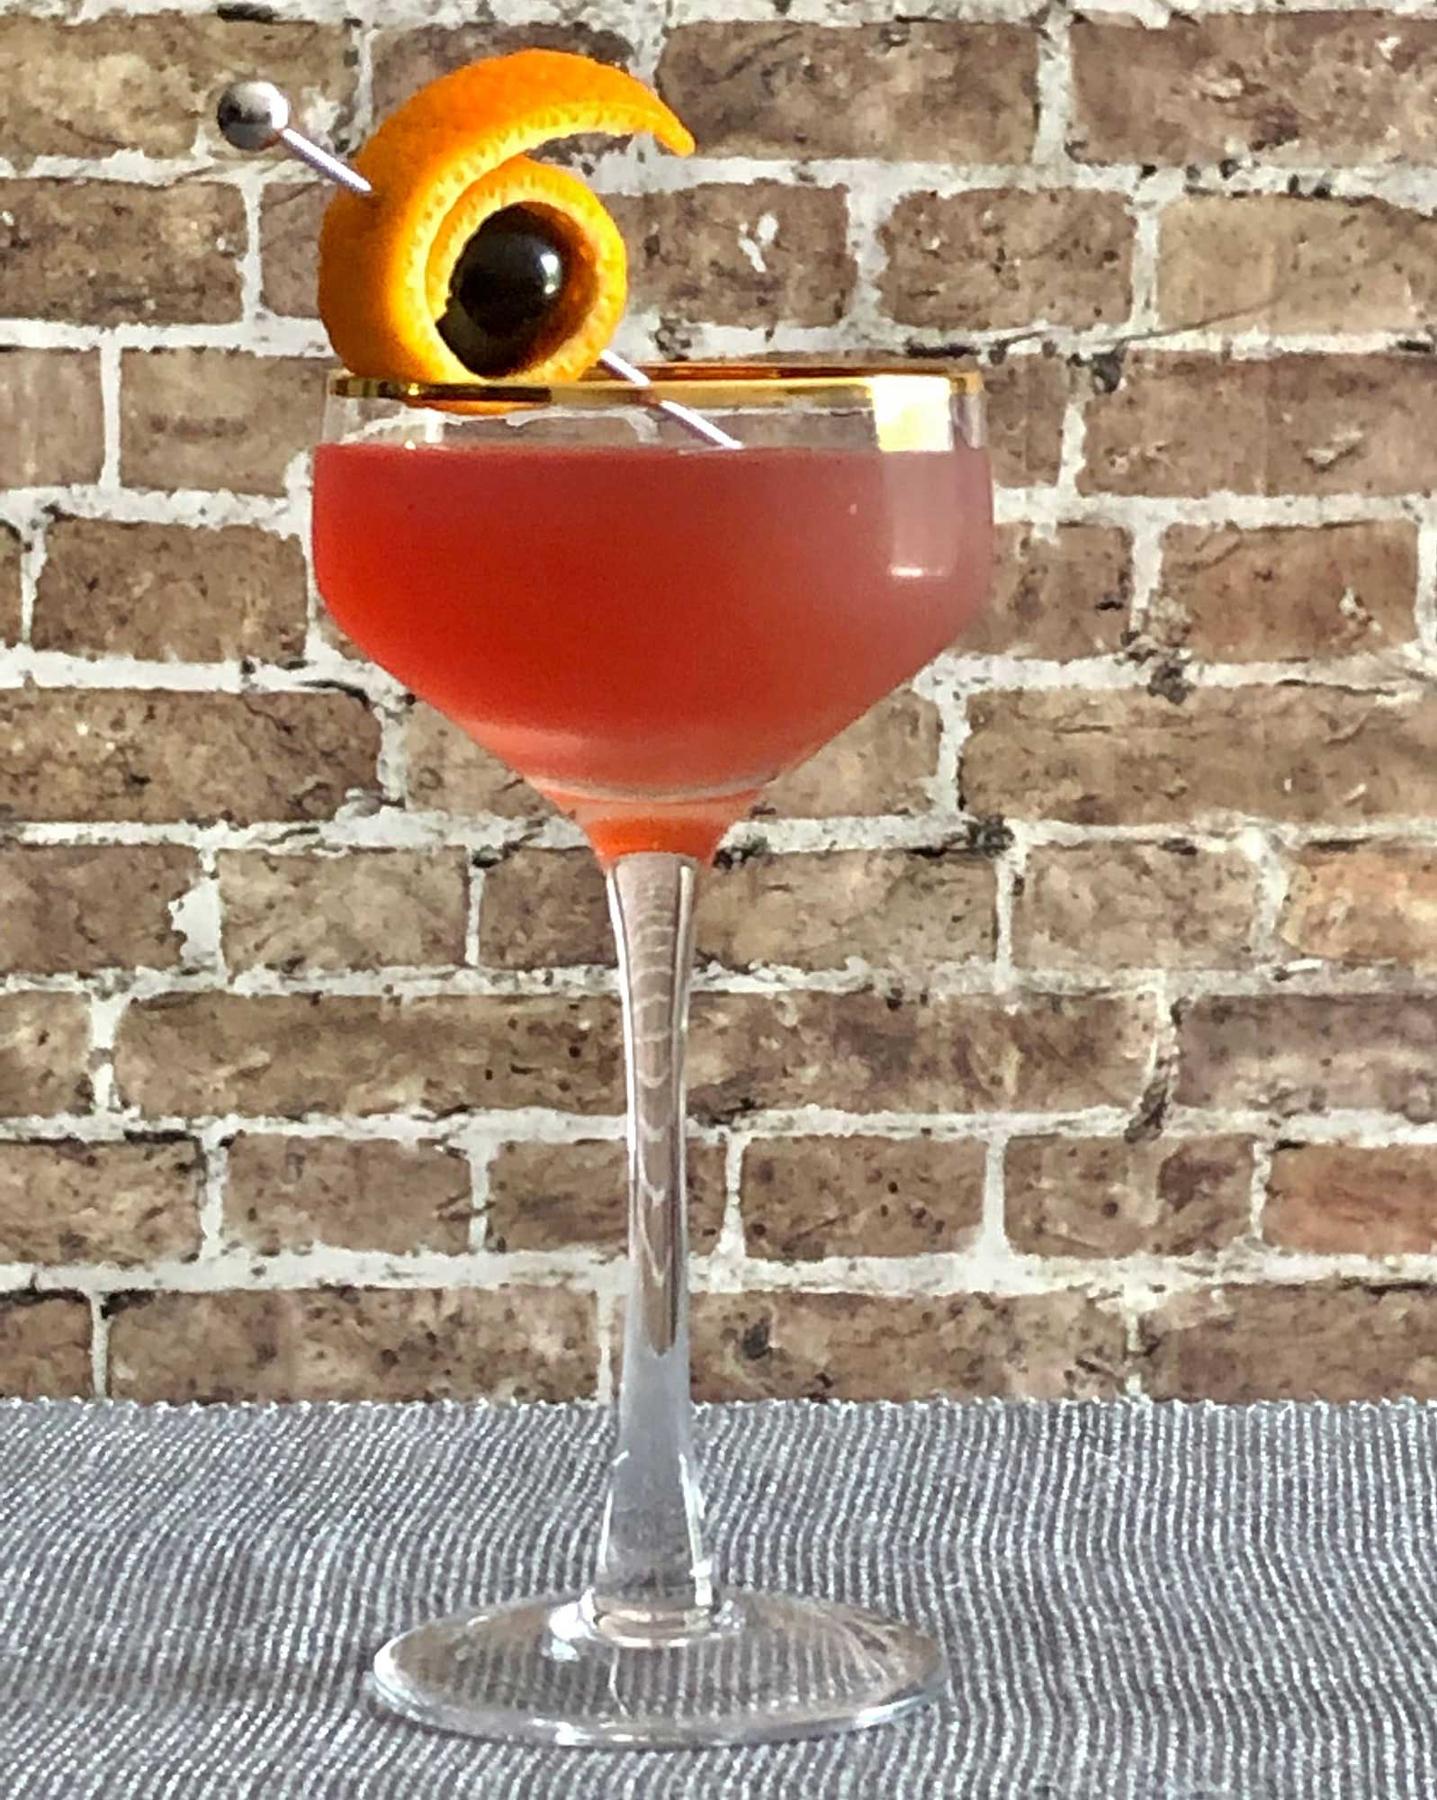 An example of the Bitches’ Brew, the mixed drink (drink), by Simon Difford, featuring Byrrh Grand Quinquina, genever, vodka, india pale ale, orange twist, and maraschino cherry; photo by Lee Edwards